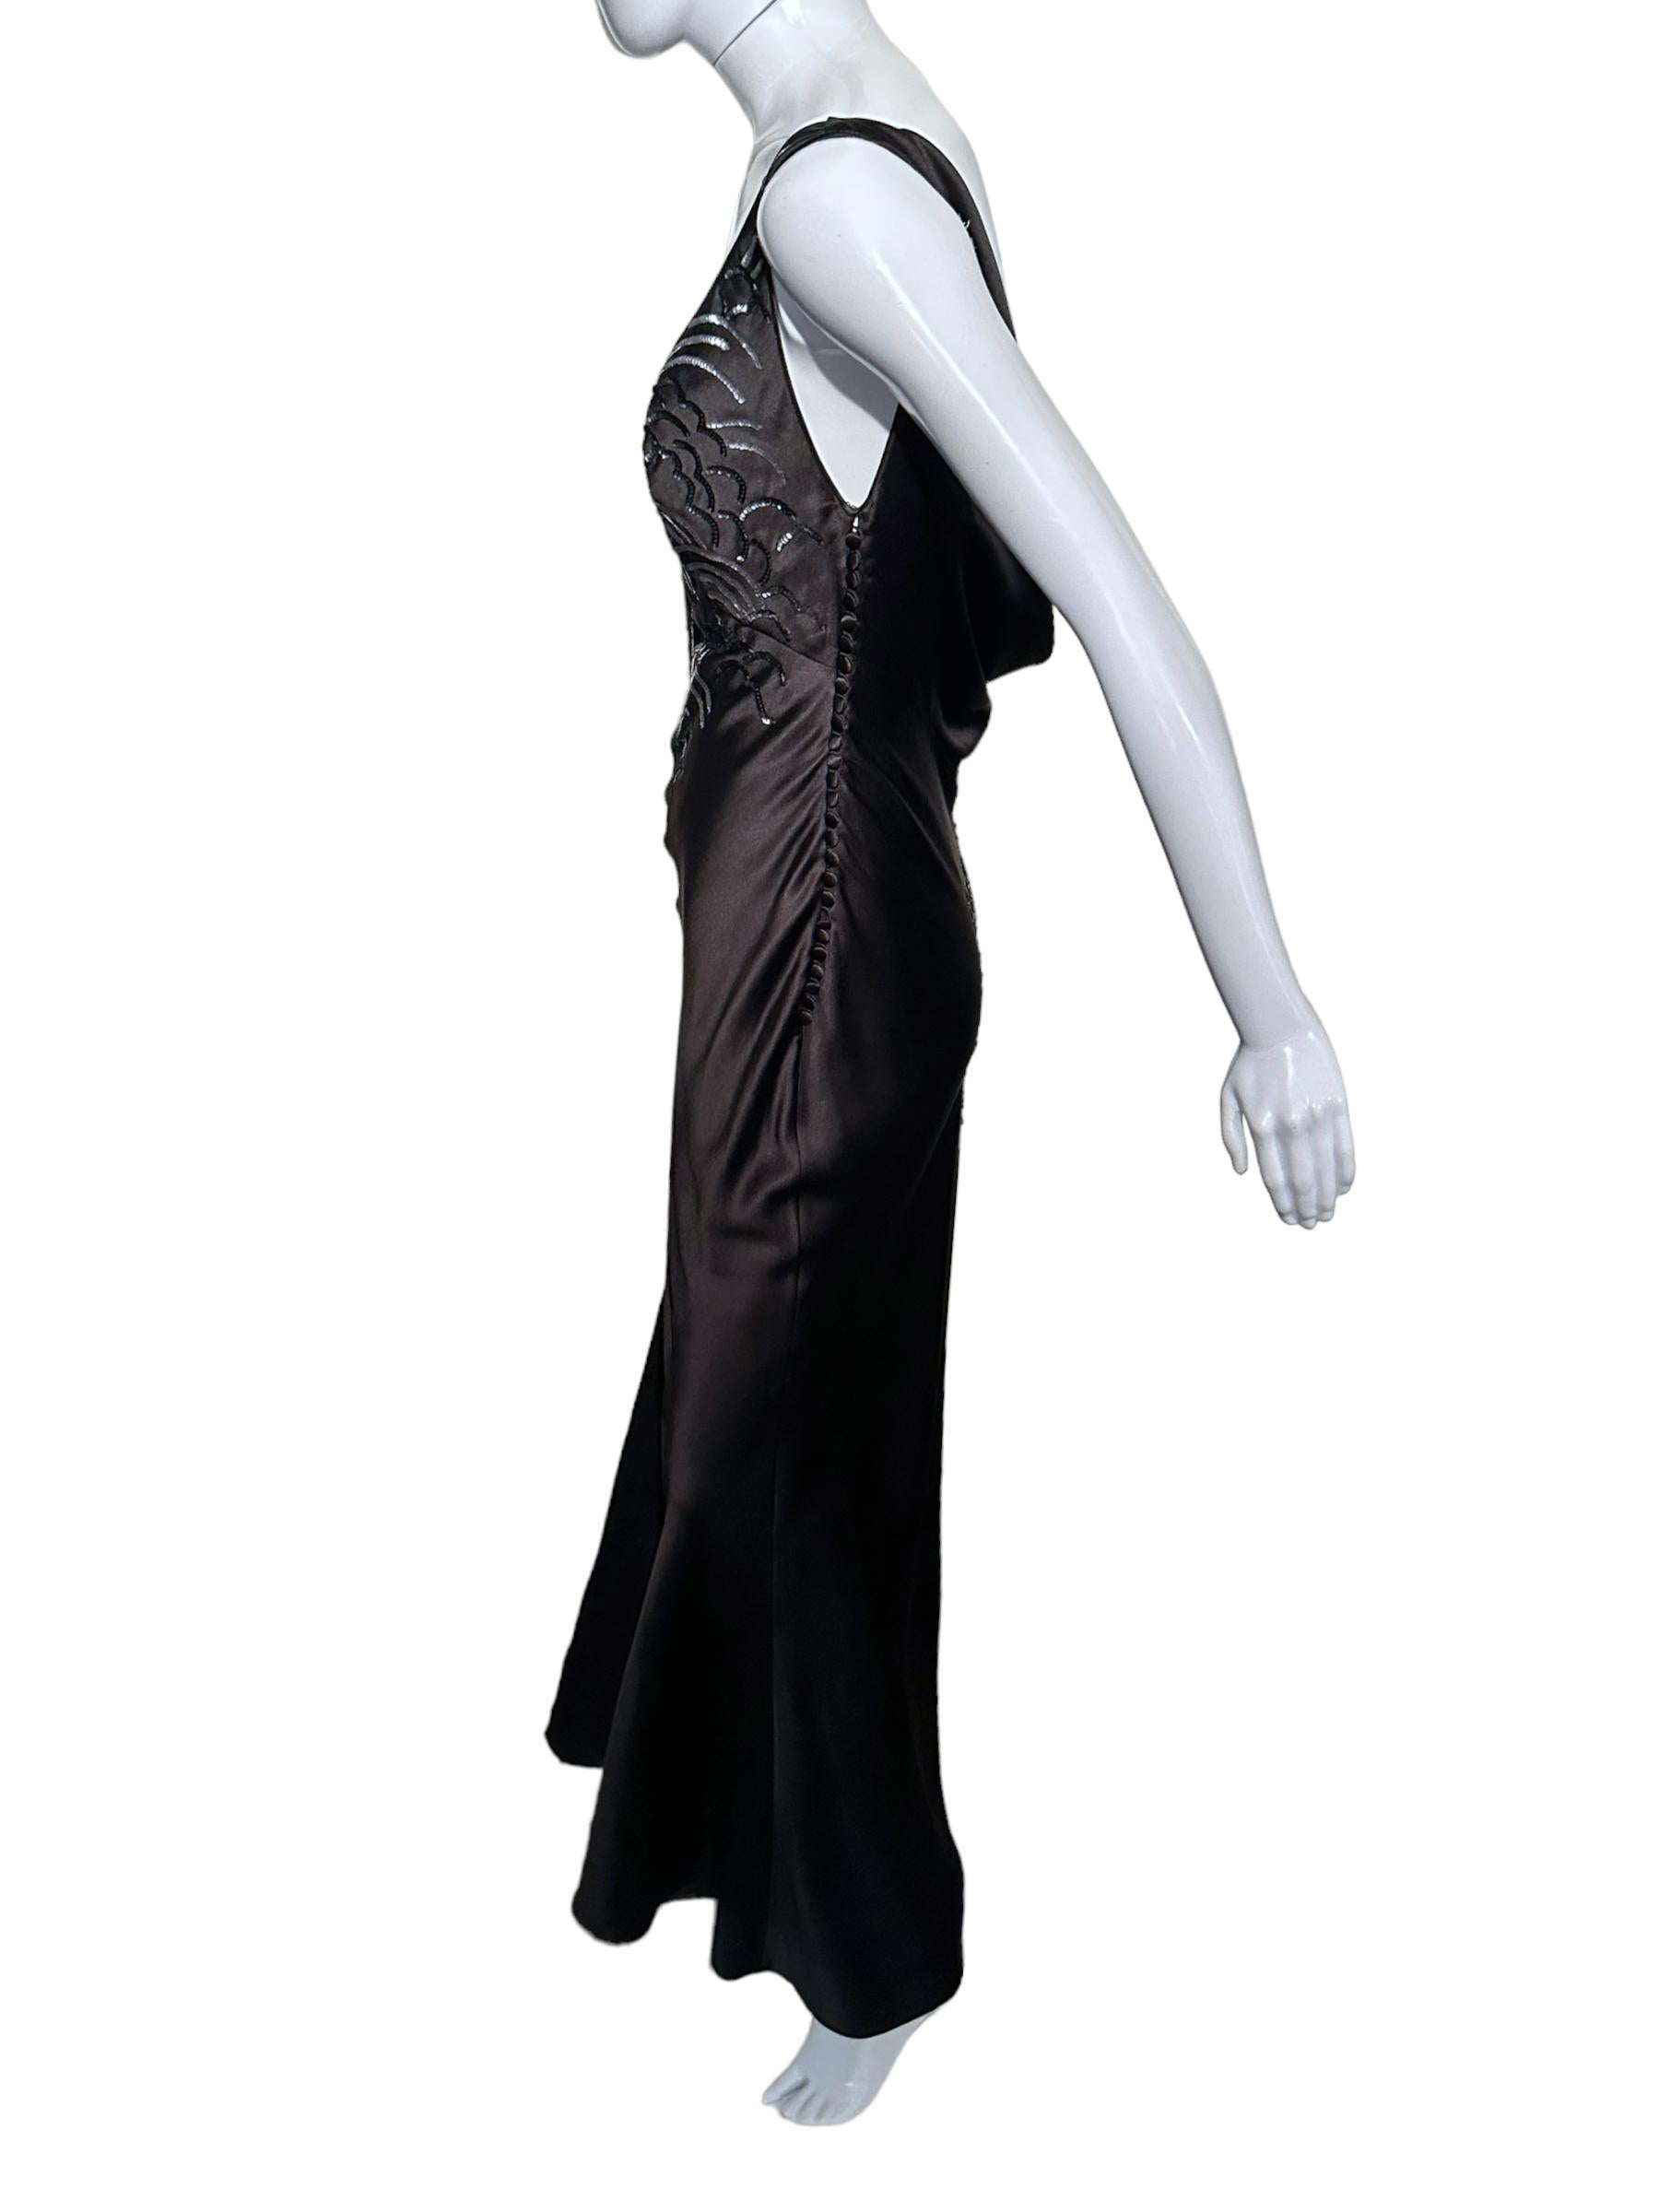 Iconic Christian Dior By John Galliano Ss 2005 Beaded Bodice Black Gown For Sale 1